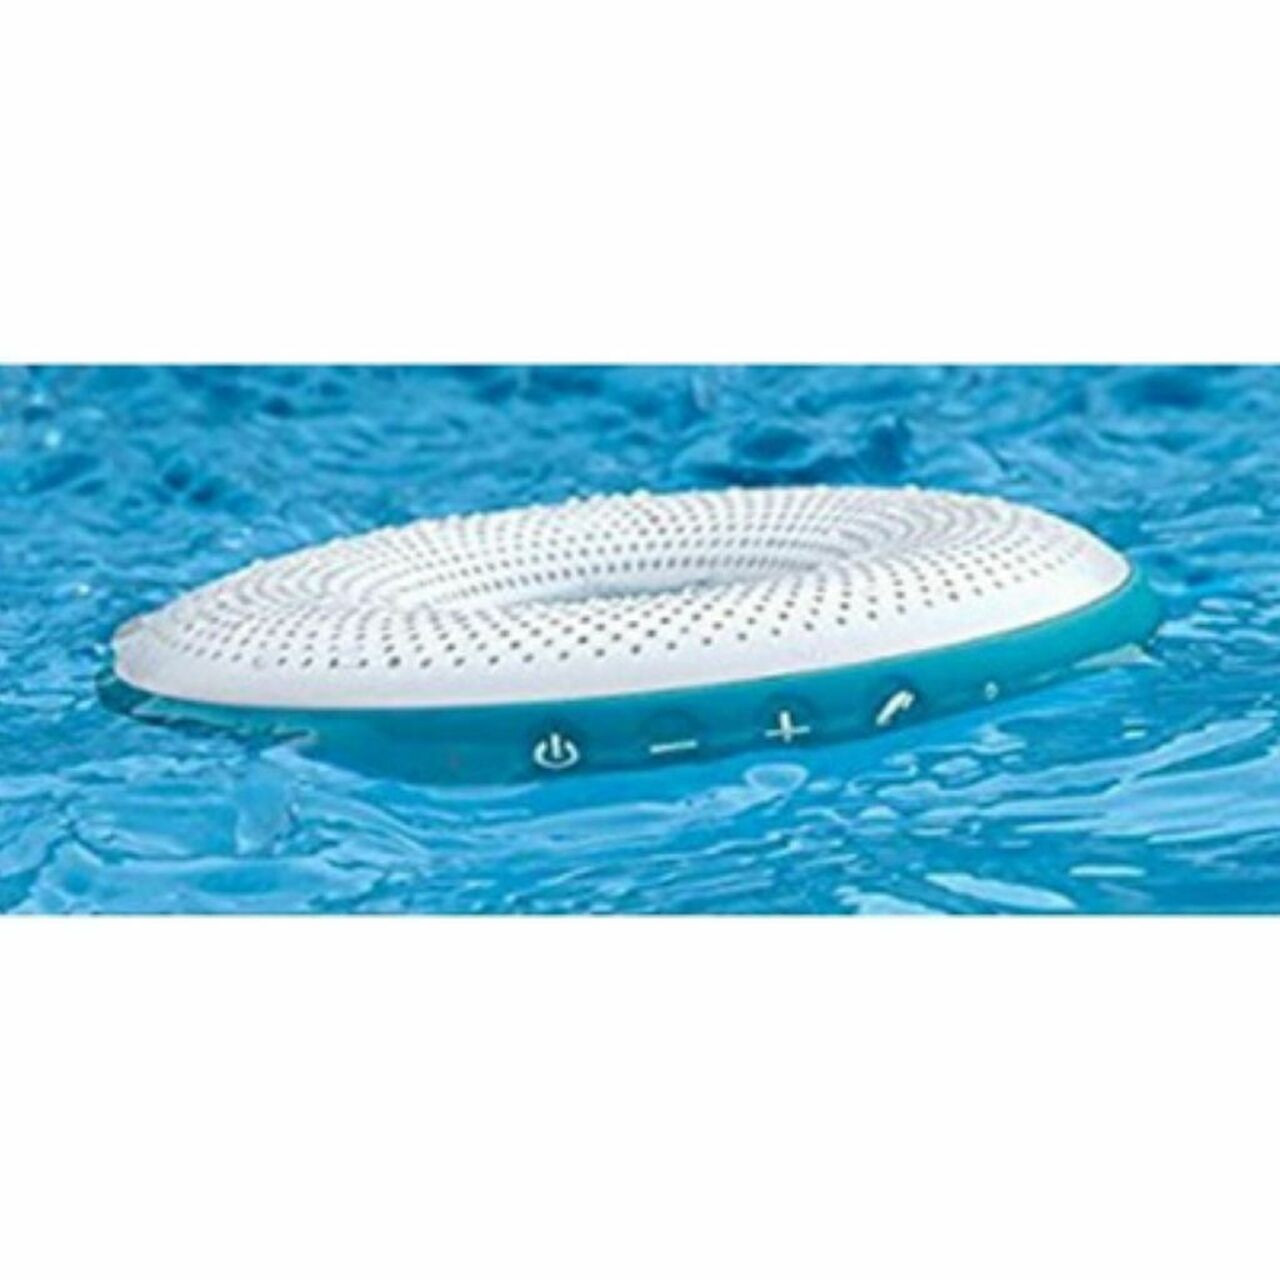 Borne BTSPK45 Waterproof Bluetooth Speaker with LED Party Lights that Floats